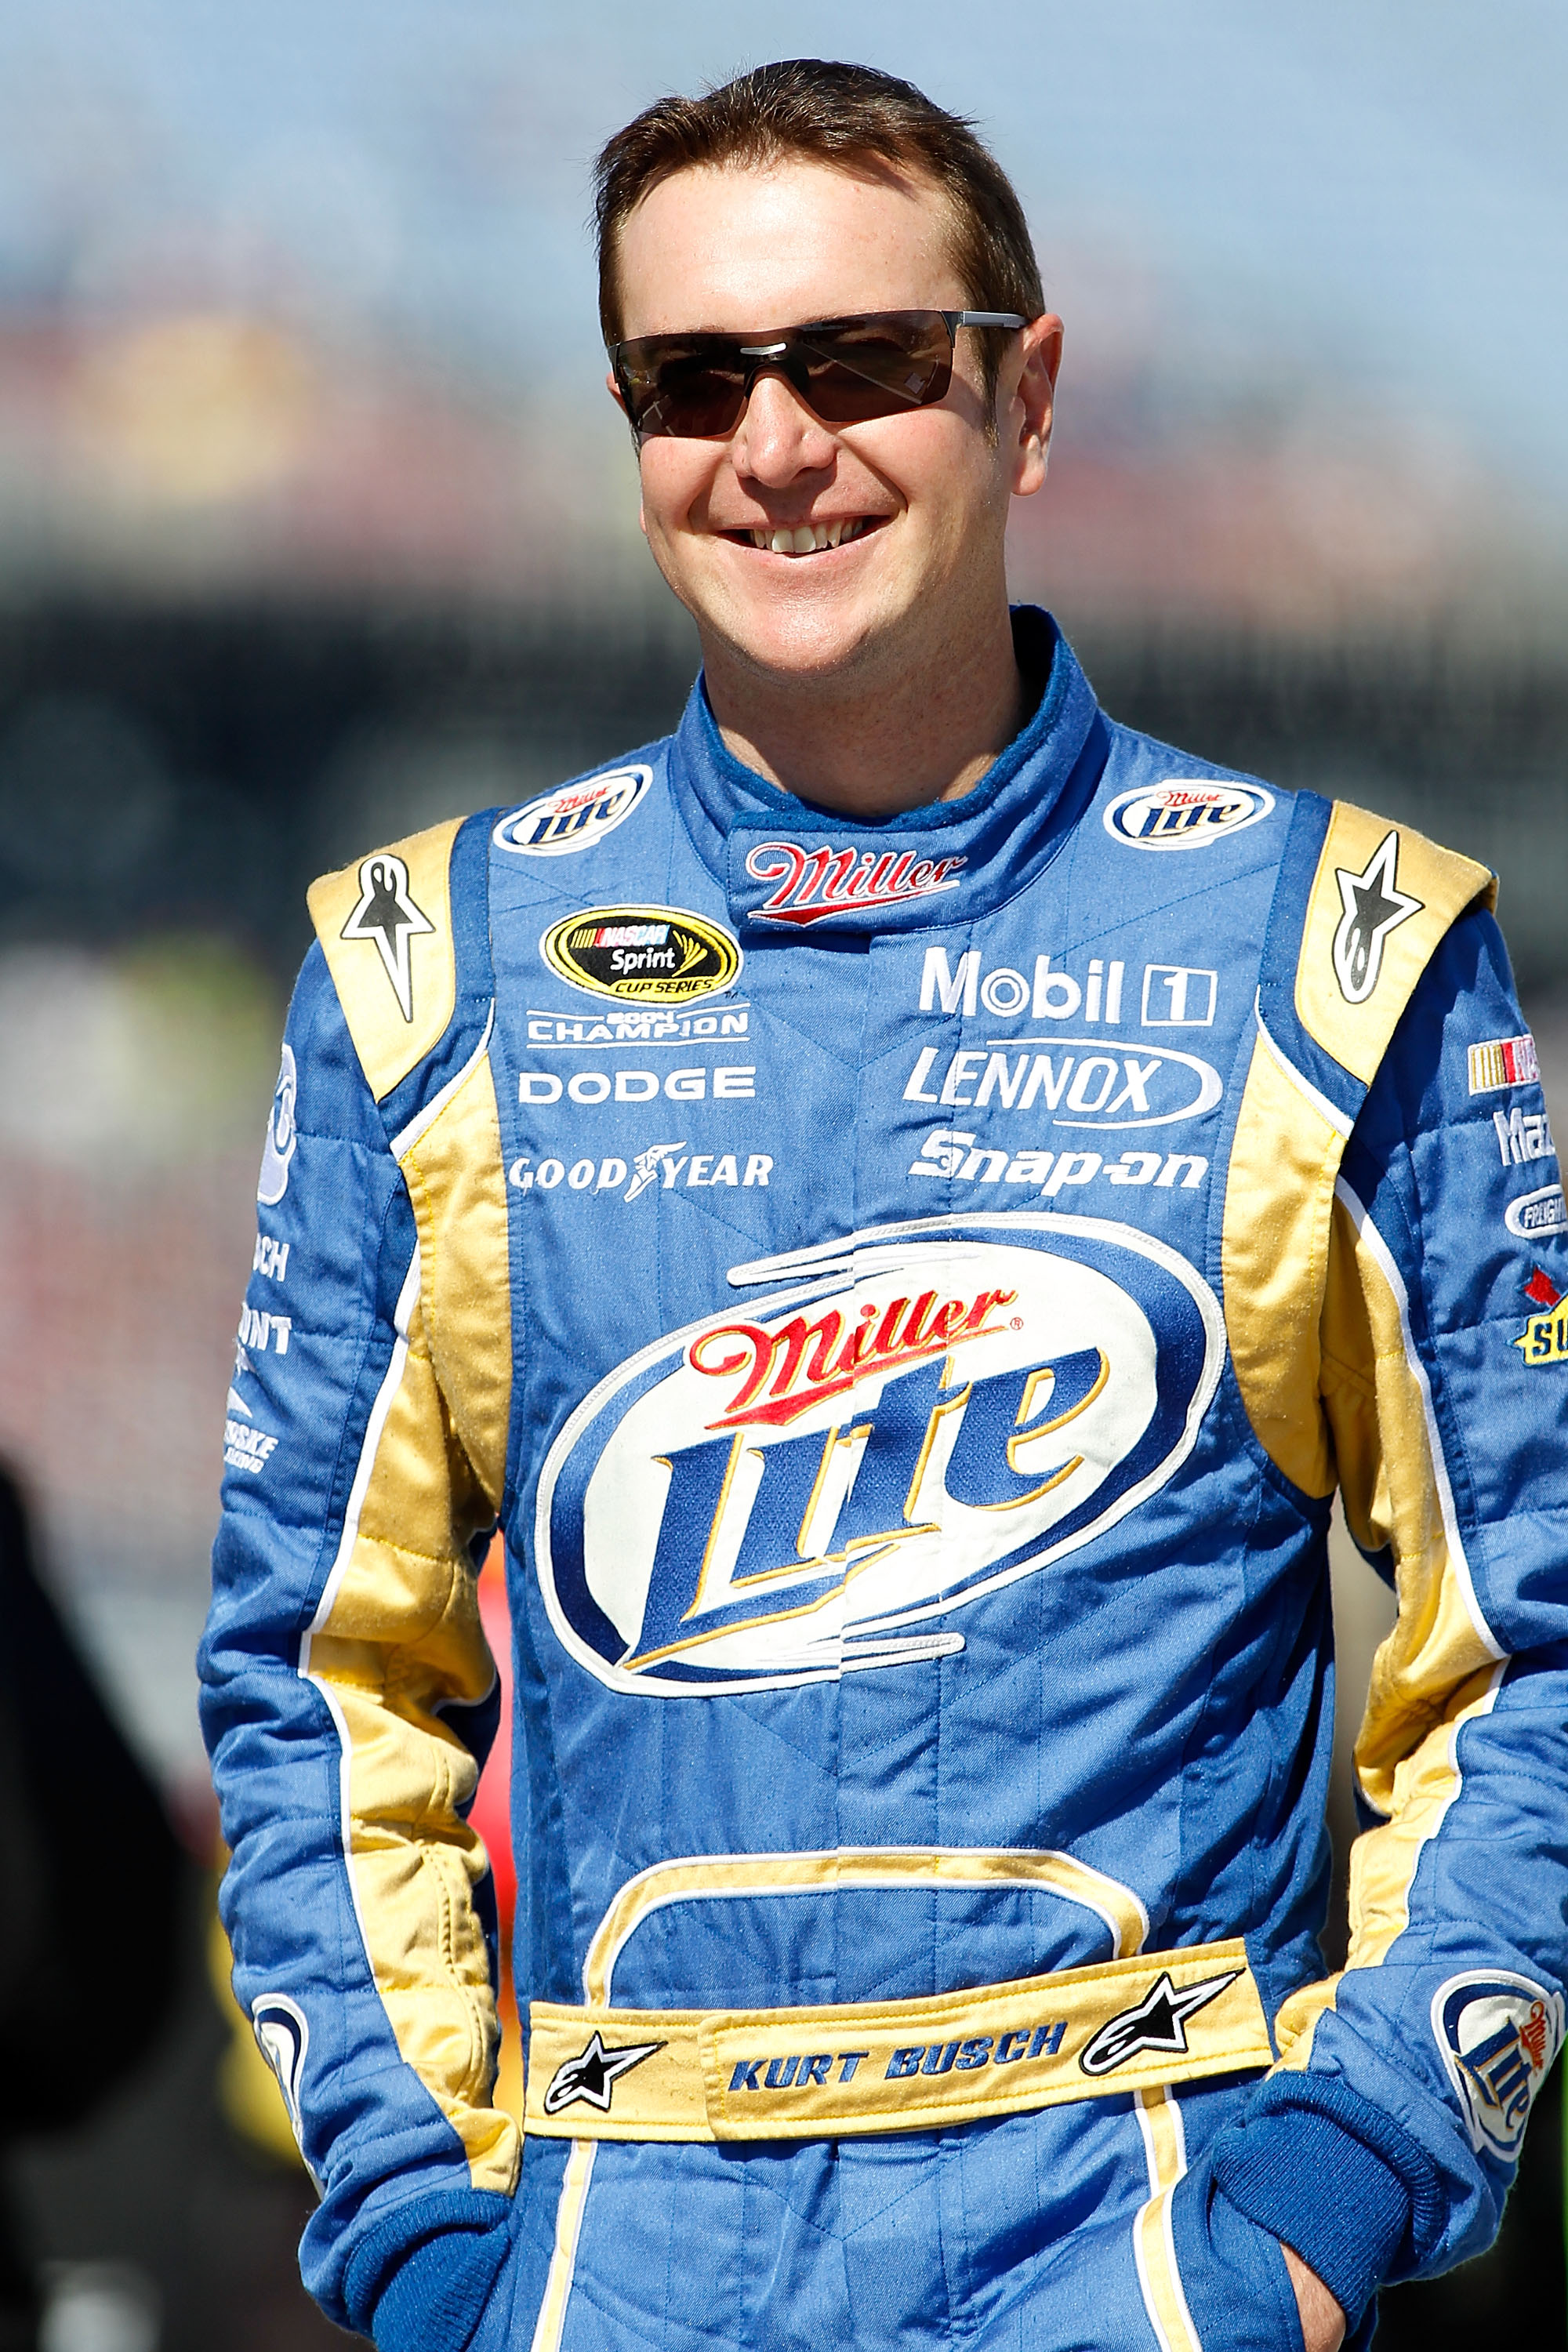 TALLADEGA, AL - OCTOBER 30:  Kurt Busch, driver of the #2 Operation Home Front/Miller Lite Dodge, walks on pit road during qualifying for the NASCAR Sprint Cup Series AMP Energy Juice 500 at Talladega Superspeedway on October 30, 2010 in Talladega, Alabam